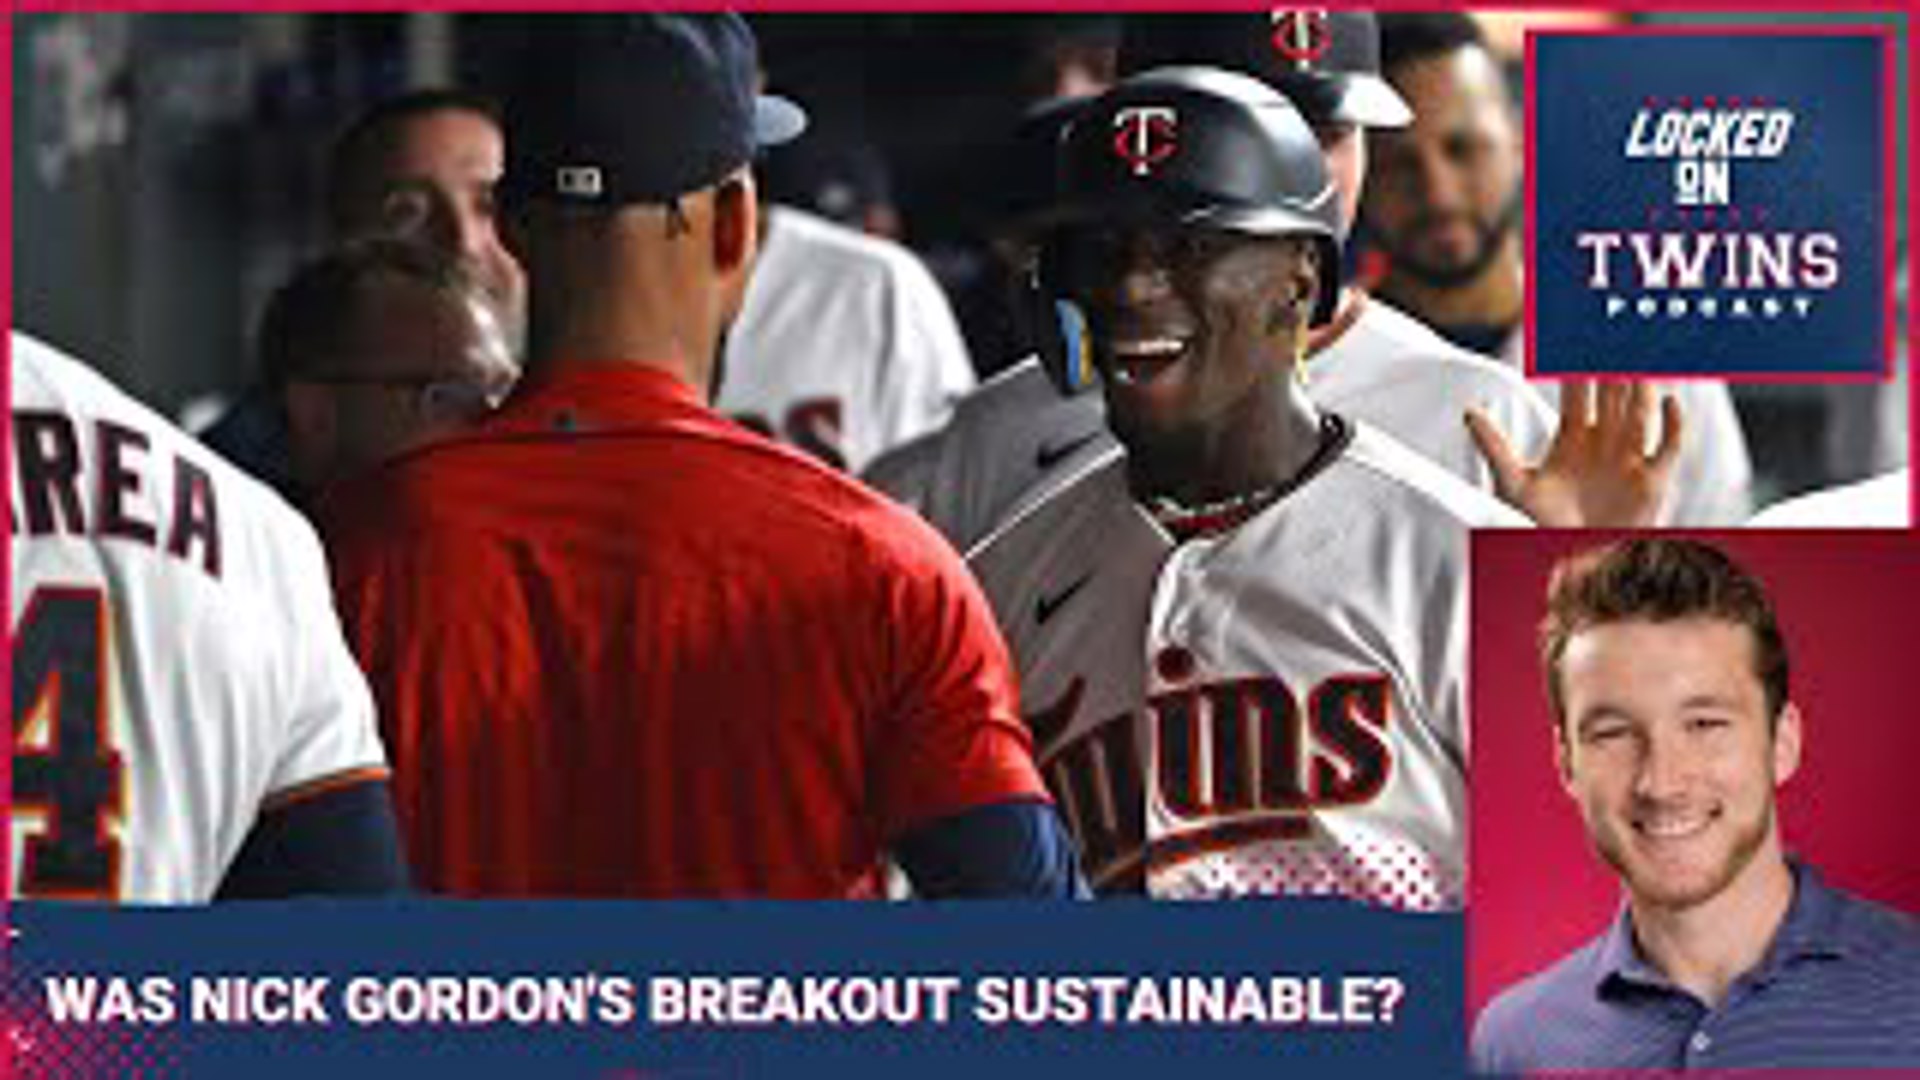 One shining bat in the Twins' lineup was in the hands of Nick Gordon, who rode a strong second half to a very good season.